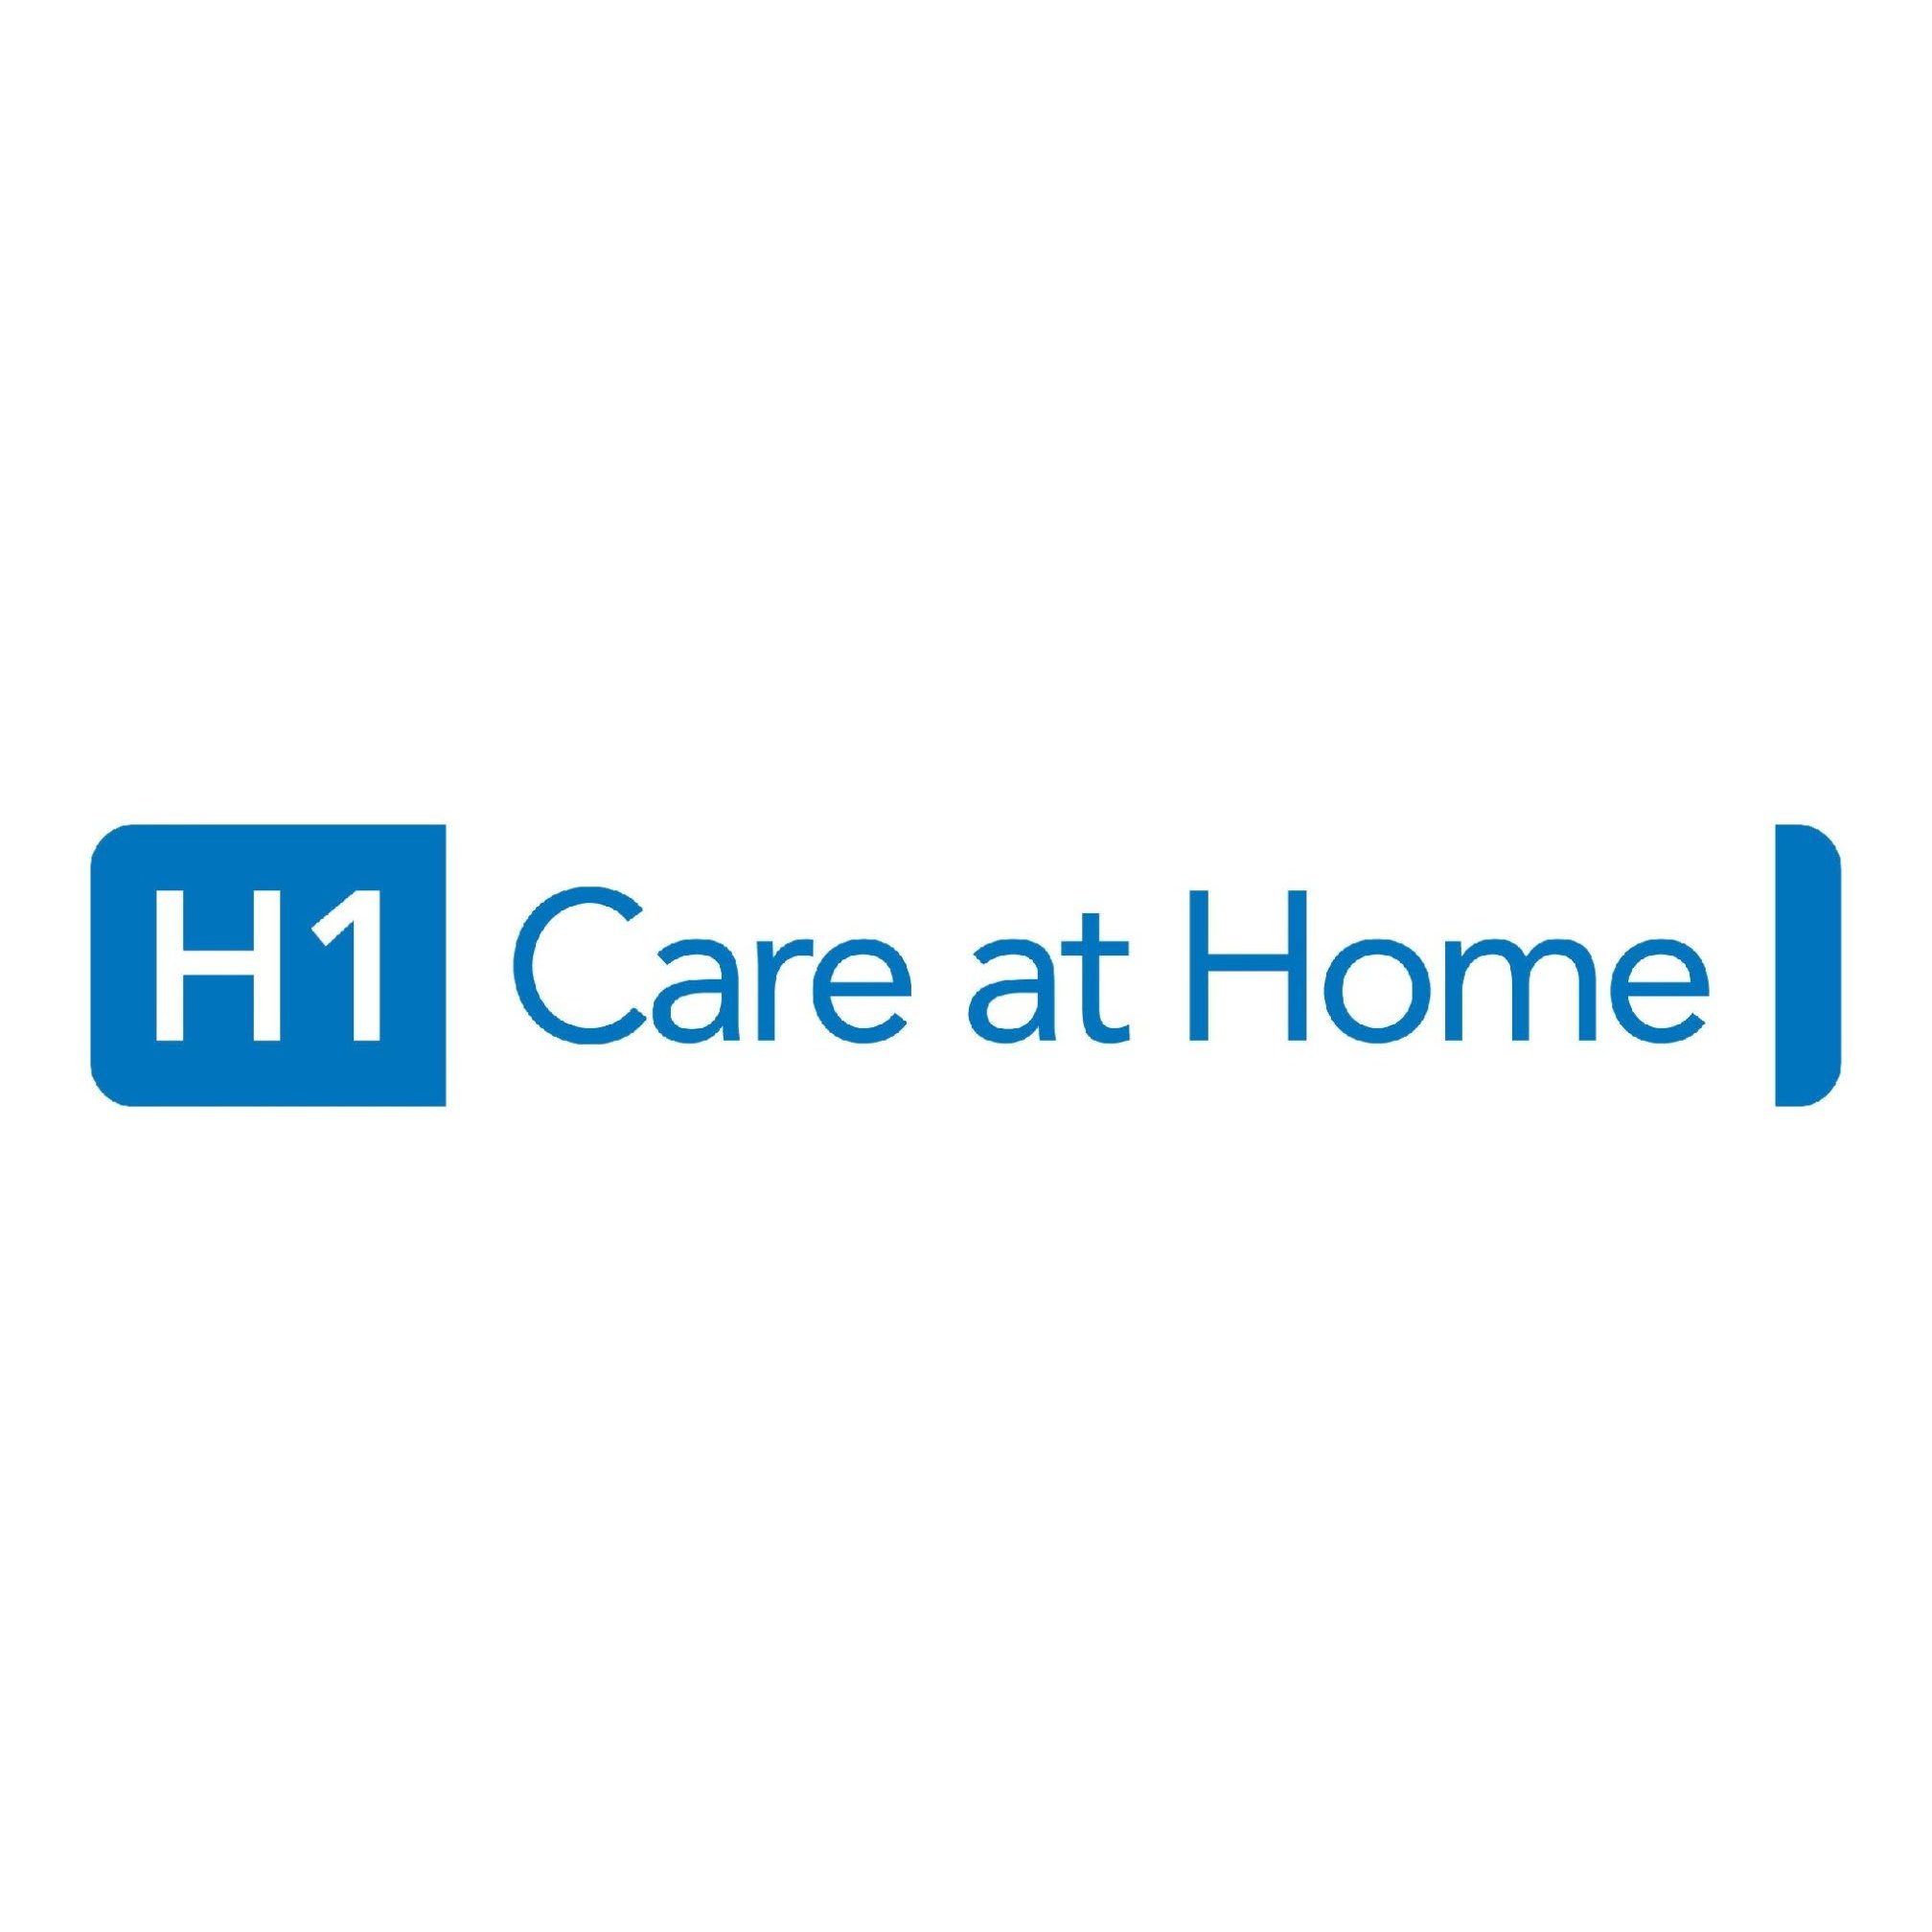 H 1 Care At Home Logo